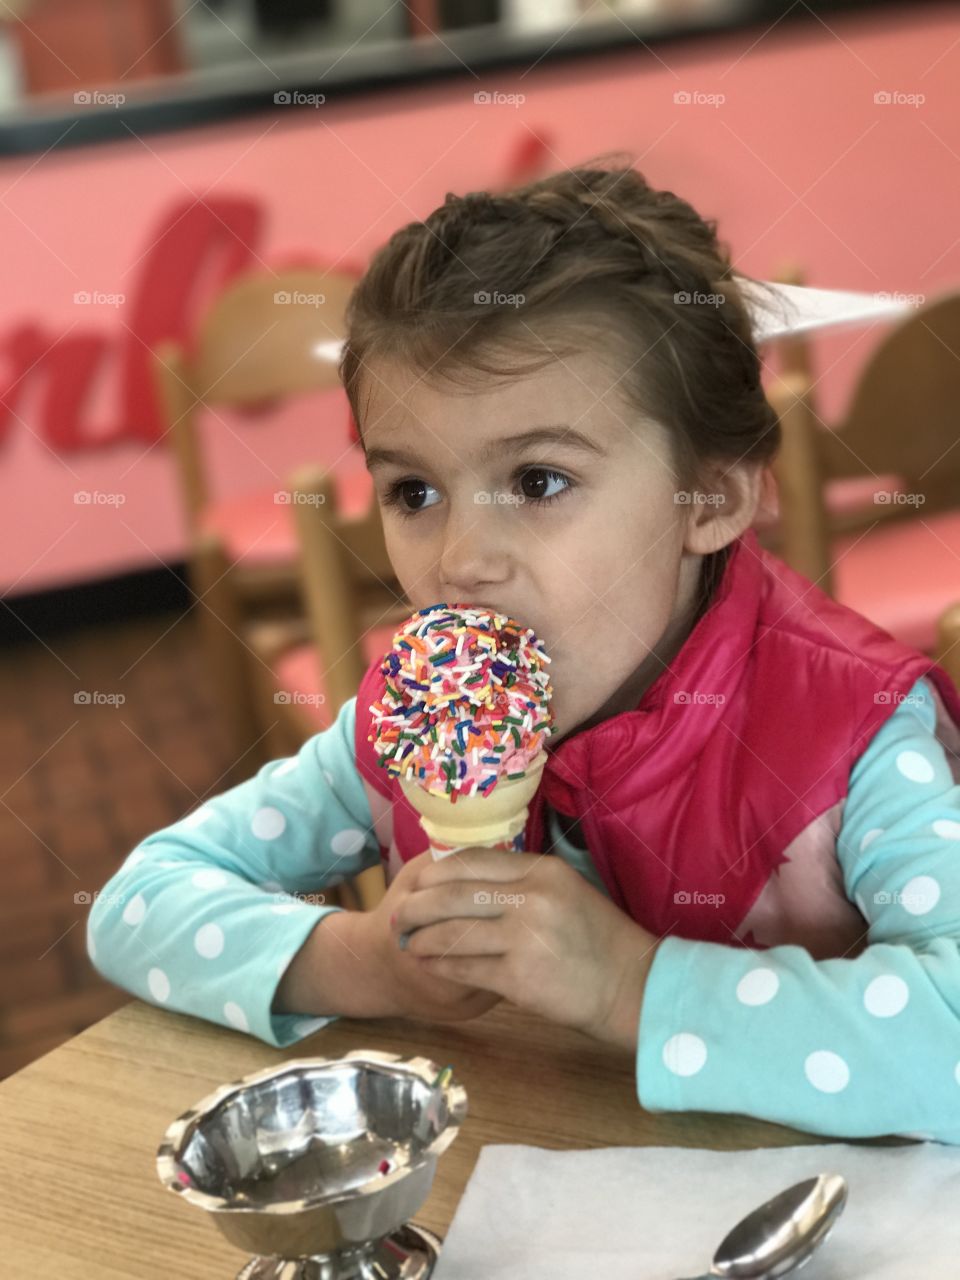 Everything is better with sprinkles 